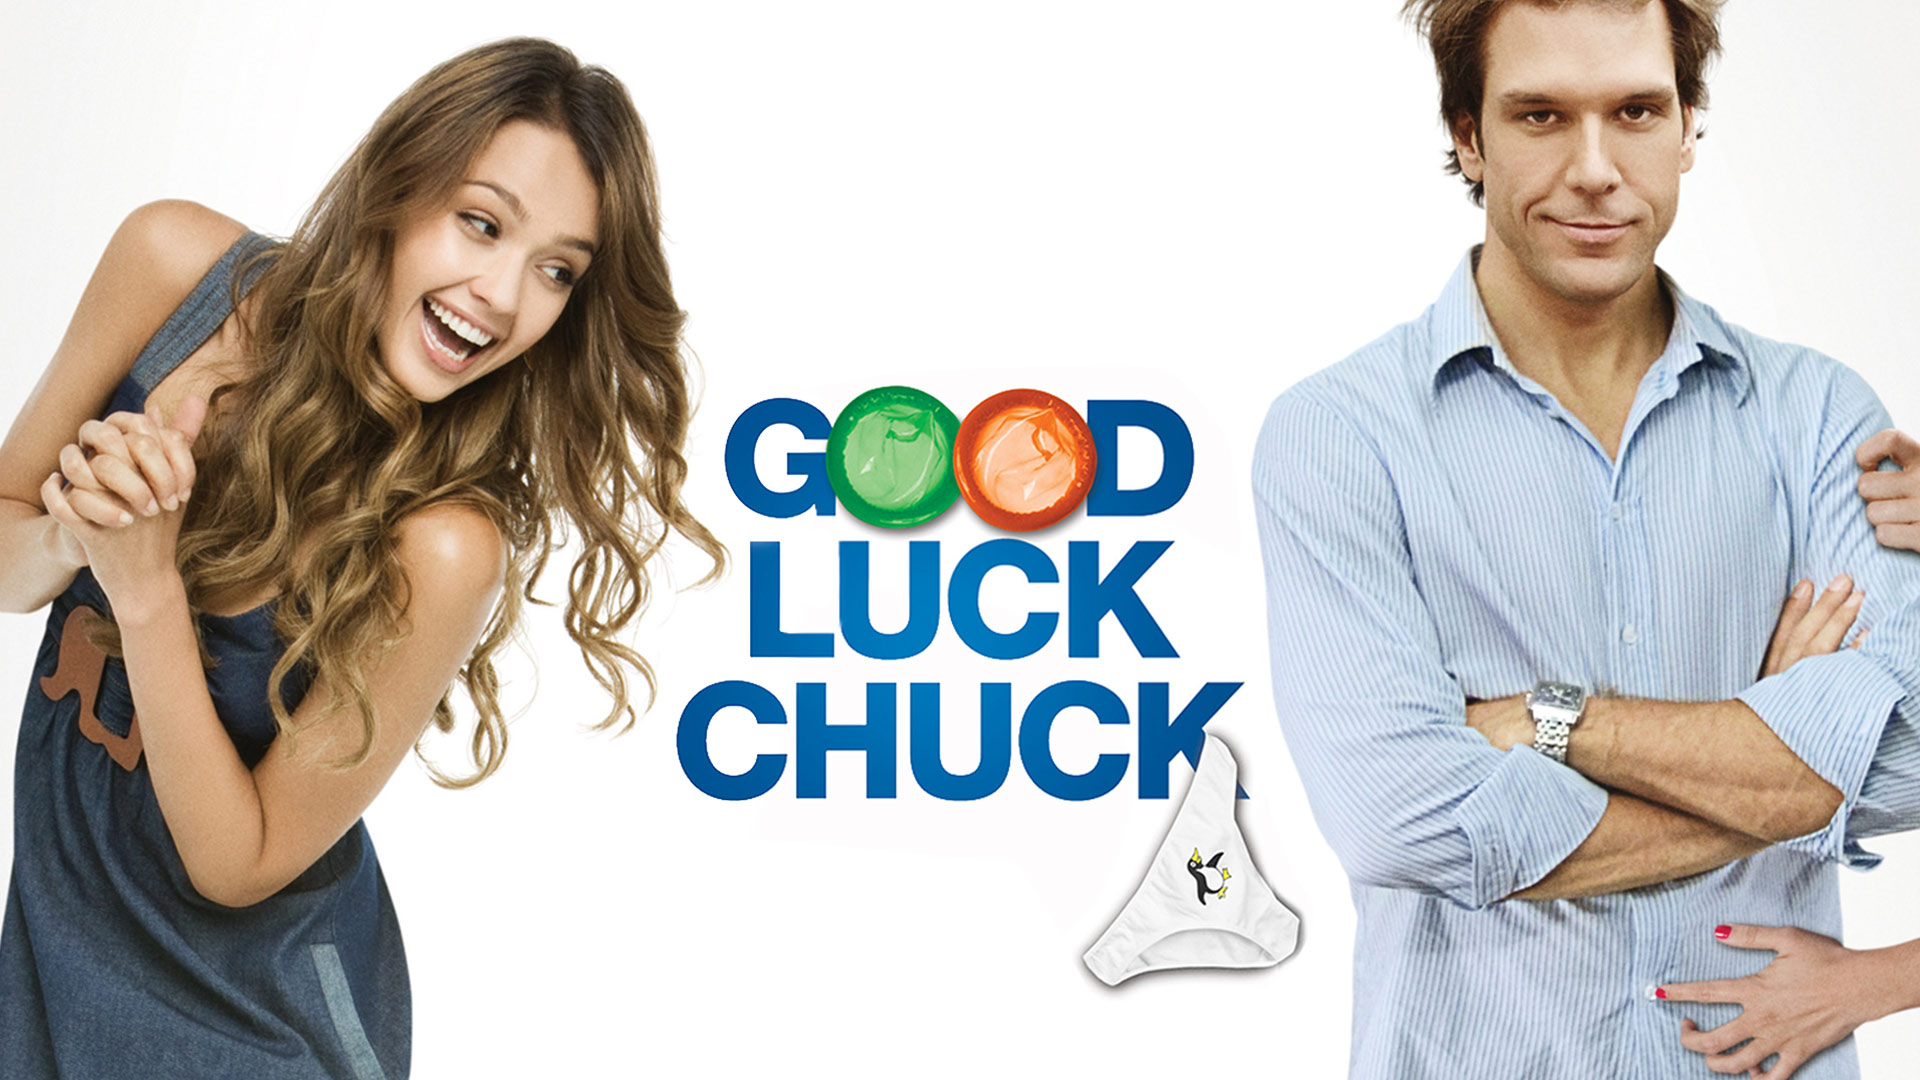 brian g fisher recommends watch good luck chuck online free pic